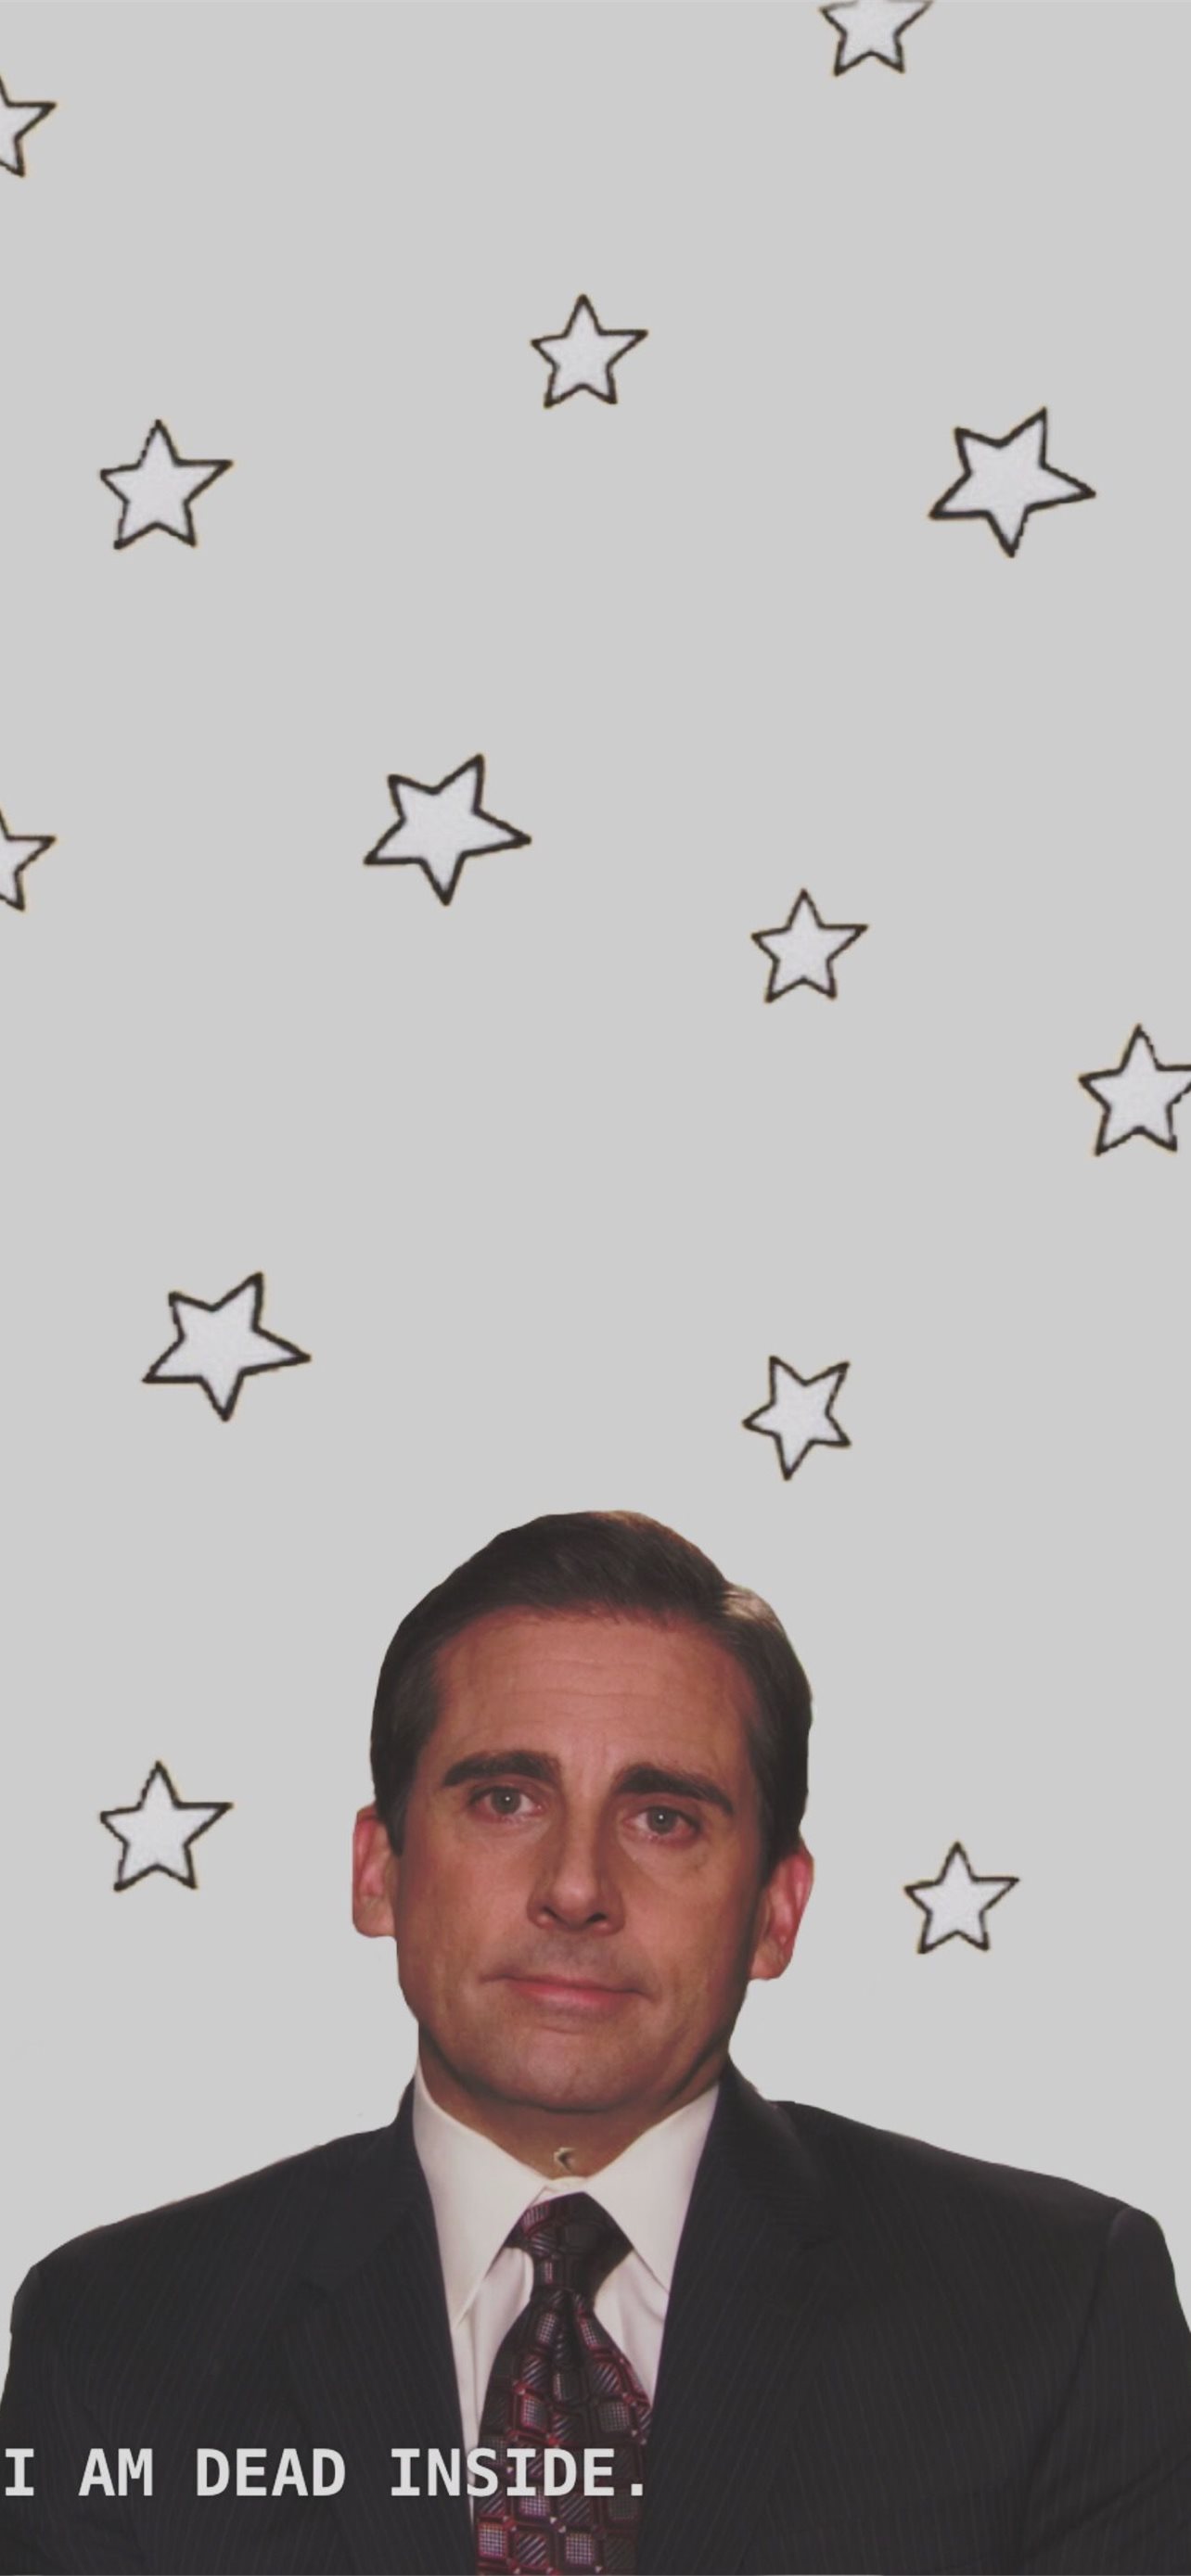 The Office Wallpaper for iPhone 12 Pro